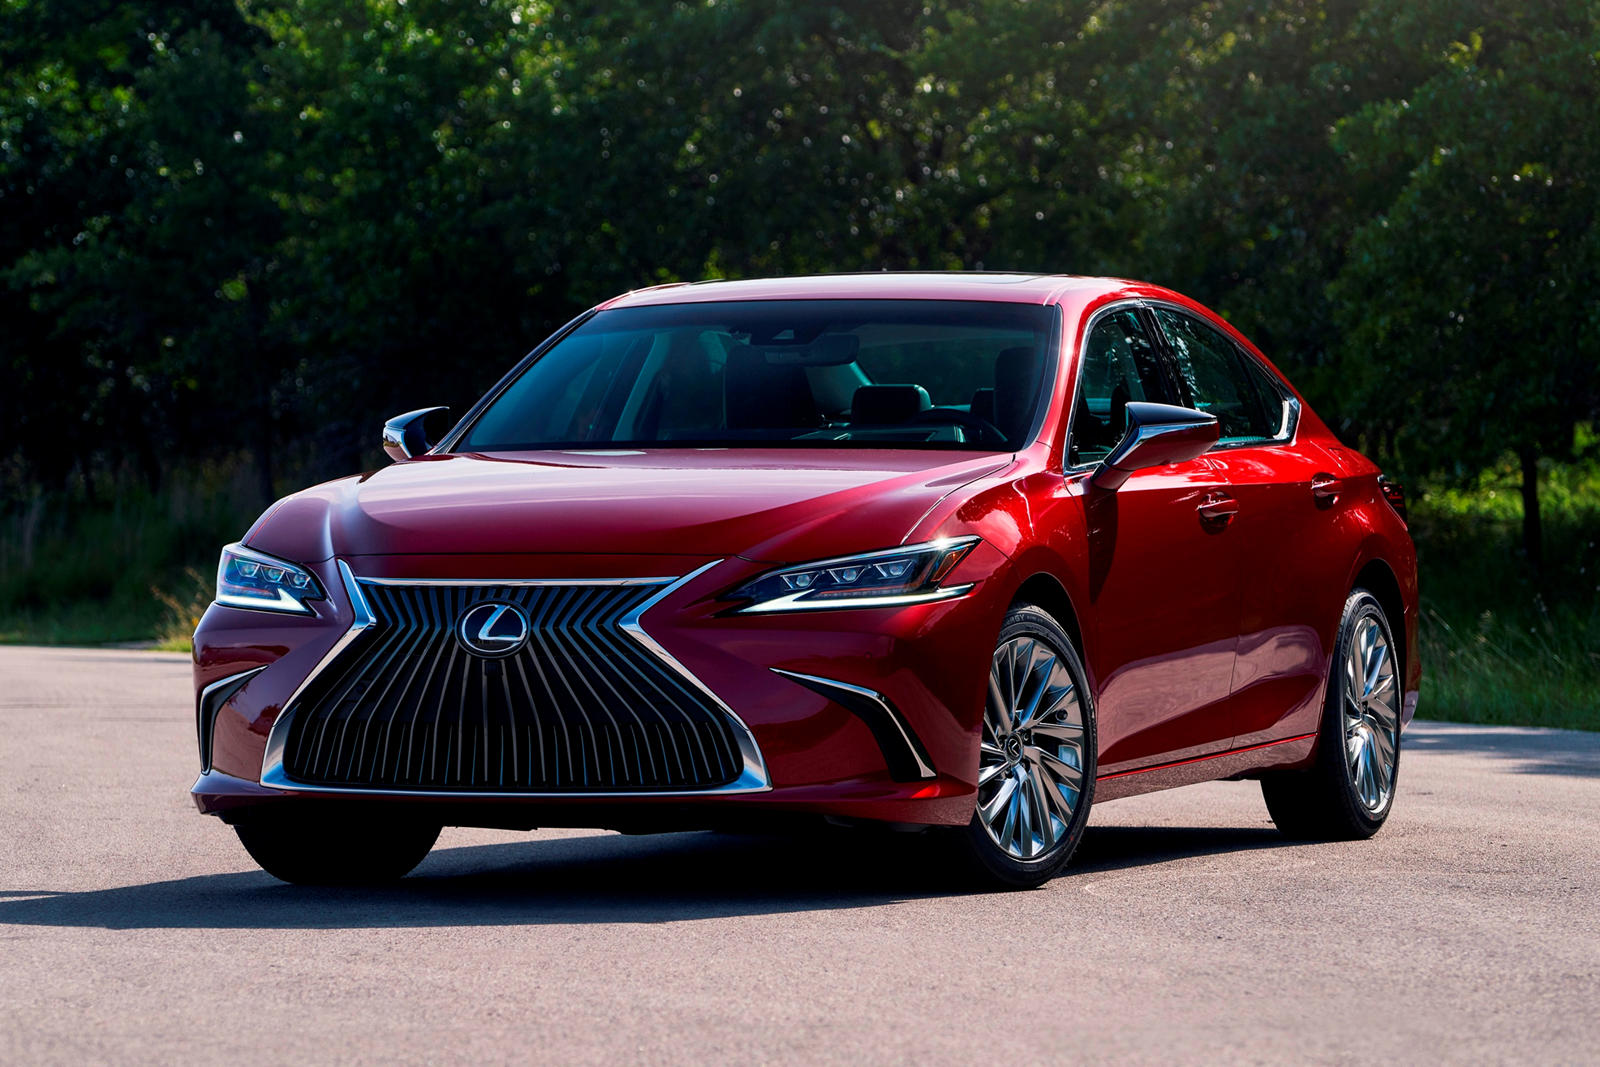 2022 Lexus ES First Look Review: Luxury With More Attitude | CarBuzz